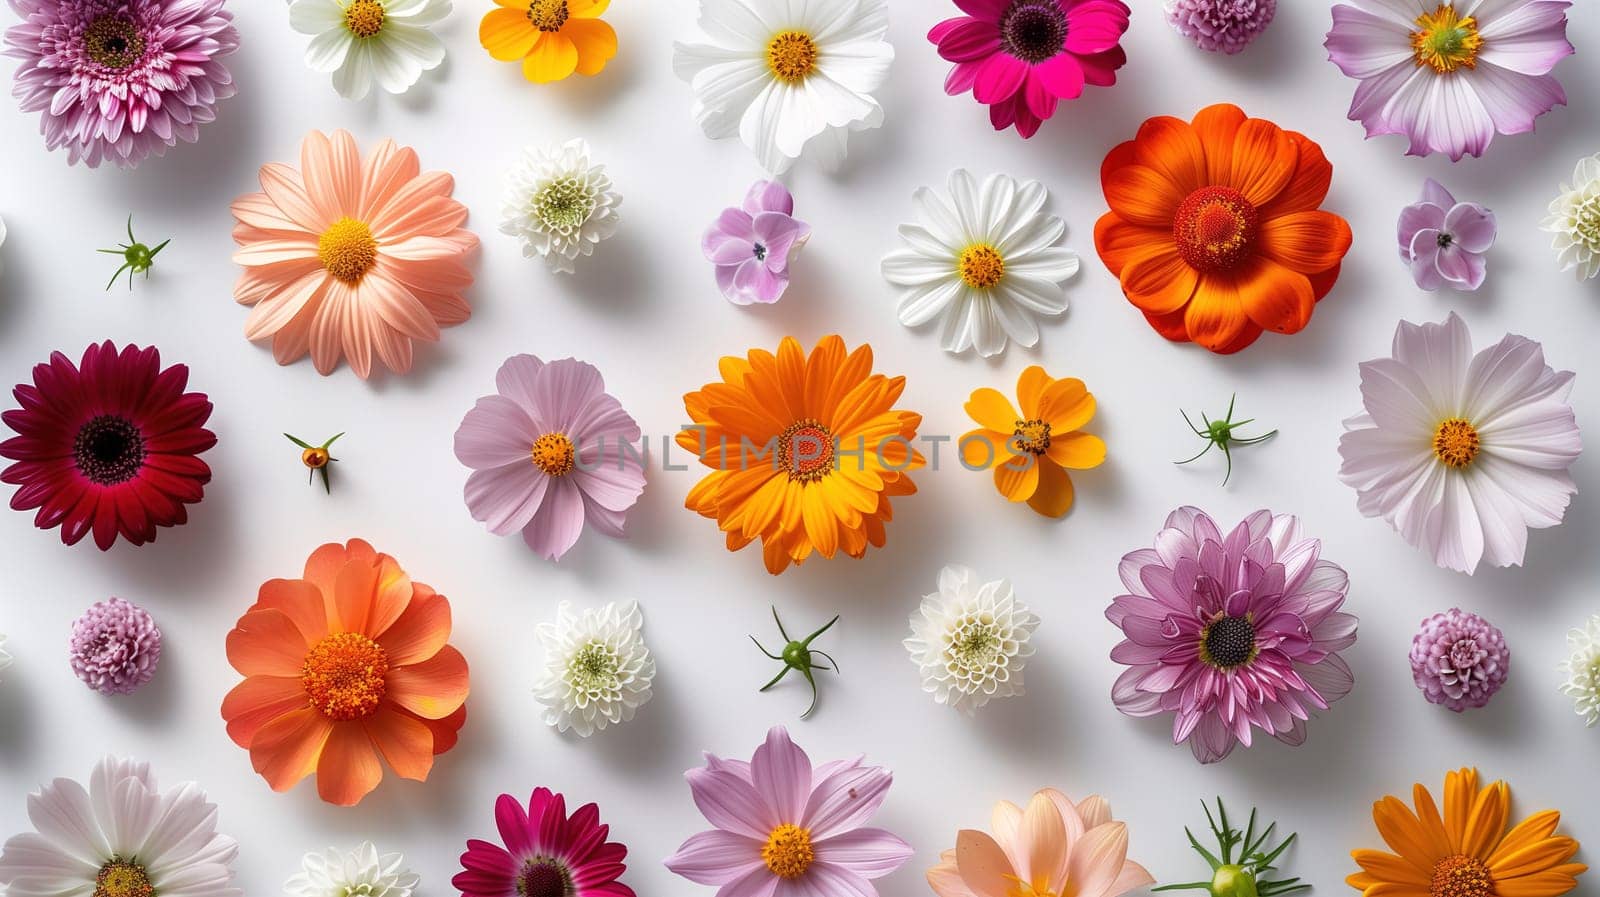 A variety of different colored flowers spread out on a white surface, creating a vibrant and colorful display. The flowers are in full bloom, showcasing their unique shapes and hues.